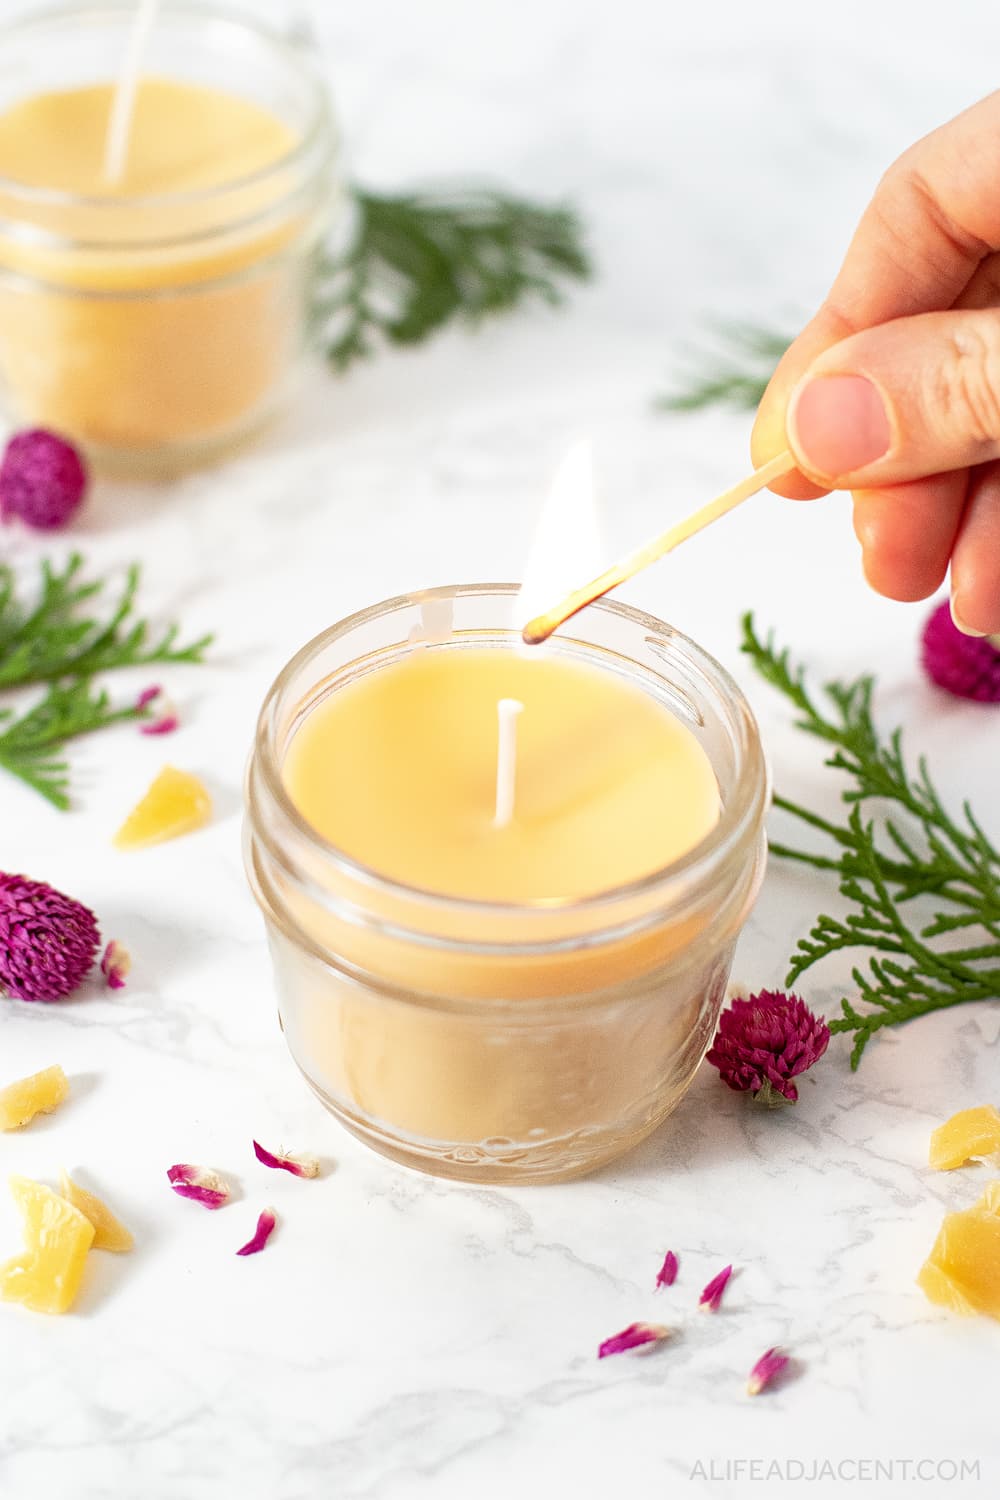 Making Candles With Essential Oils: How to Make Fragrant, Natural Candles